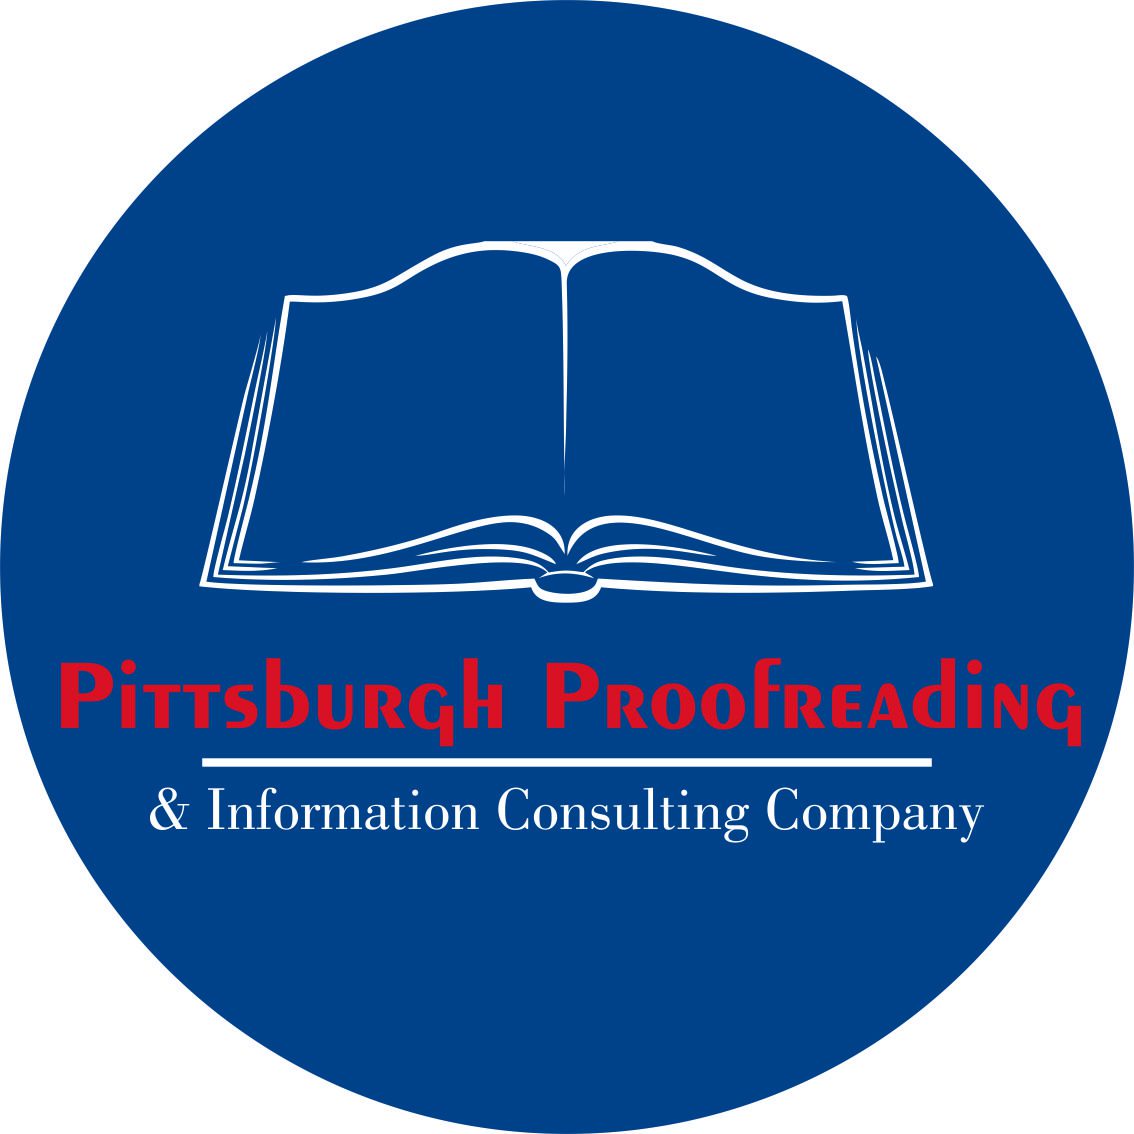 Pittsburgh Proofreading & Information Consulting Company